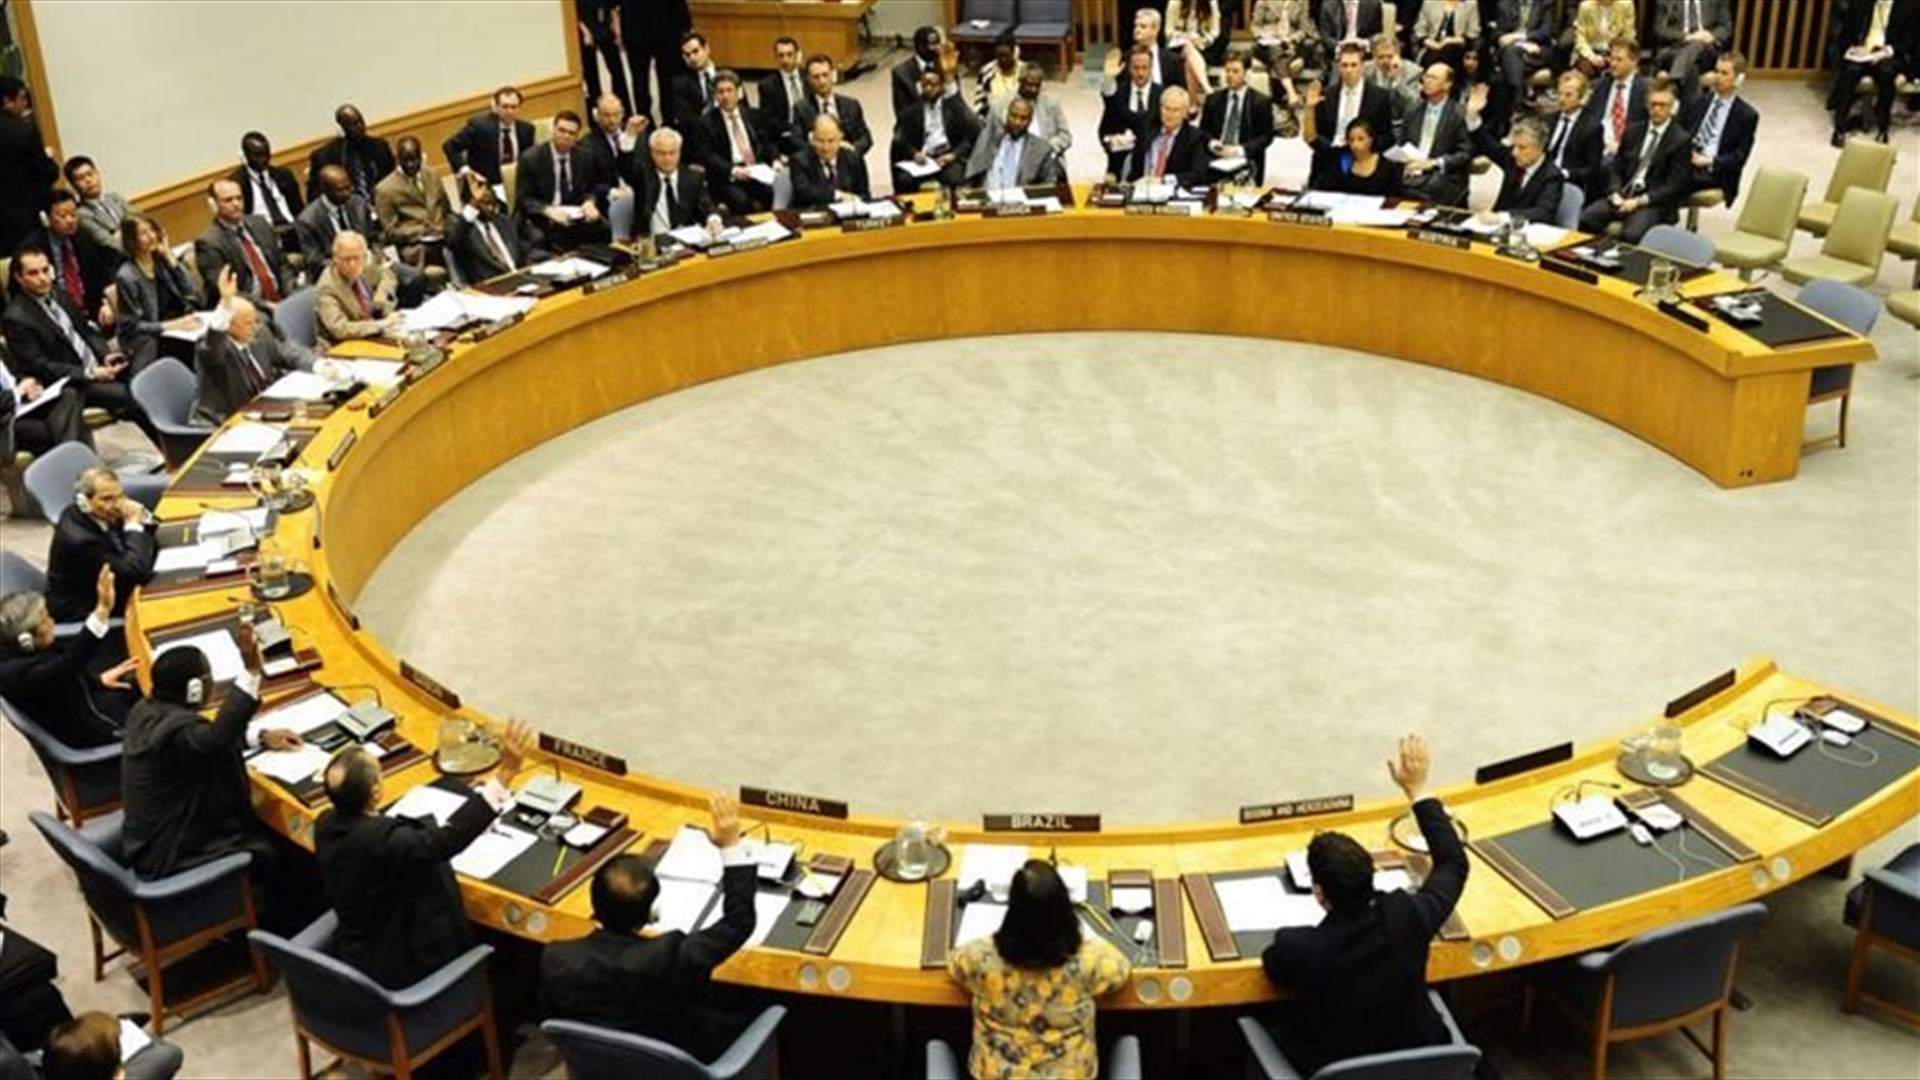 Sweden wins seat on UN Security Council on first ballot